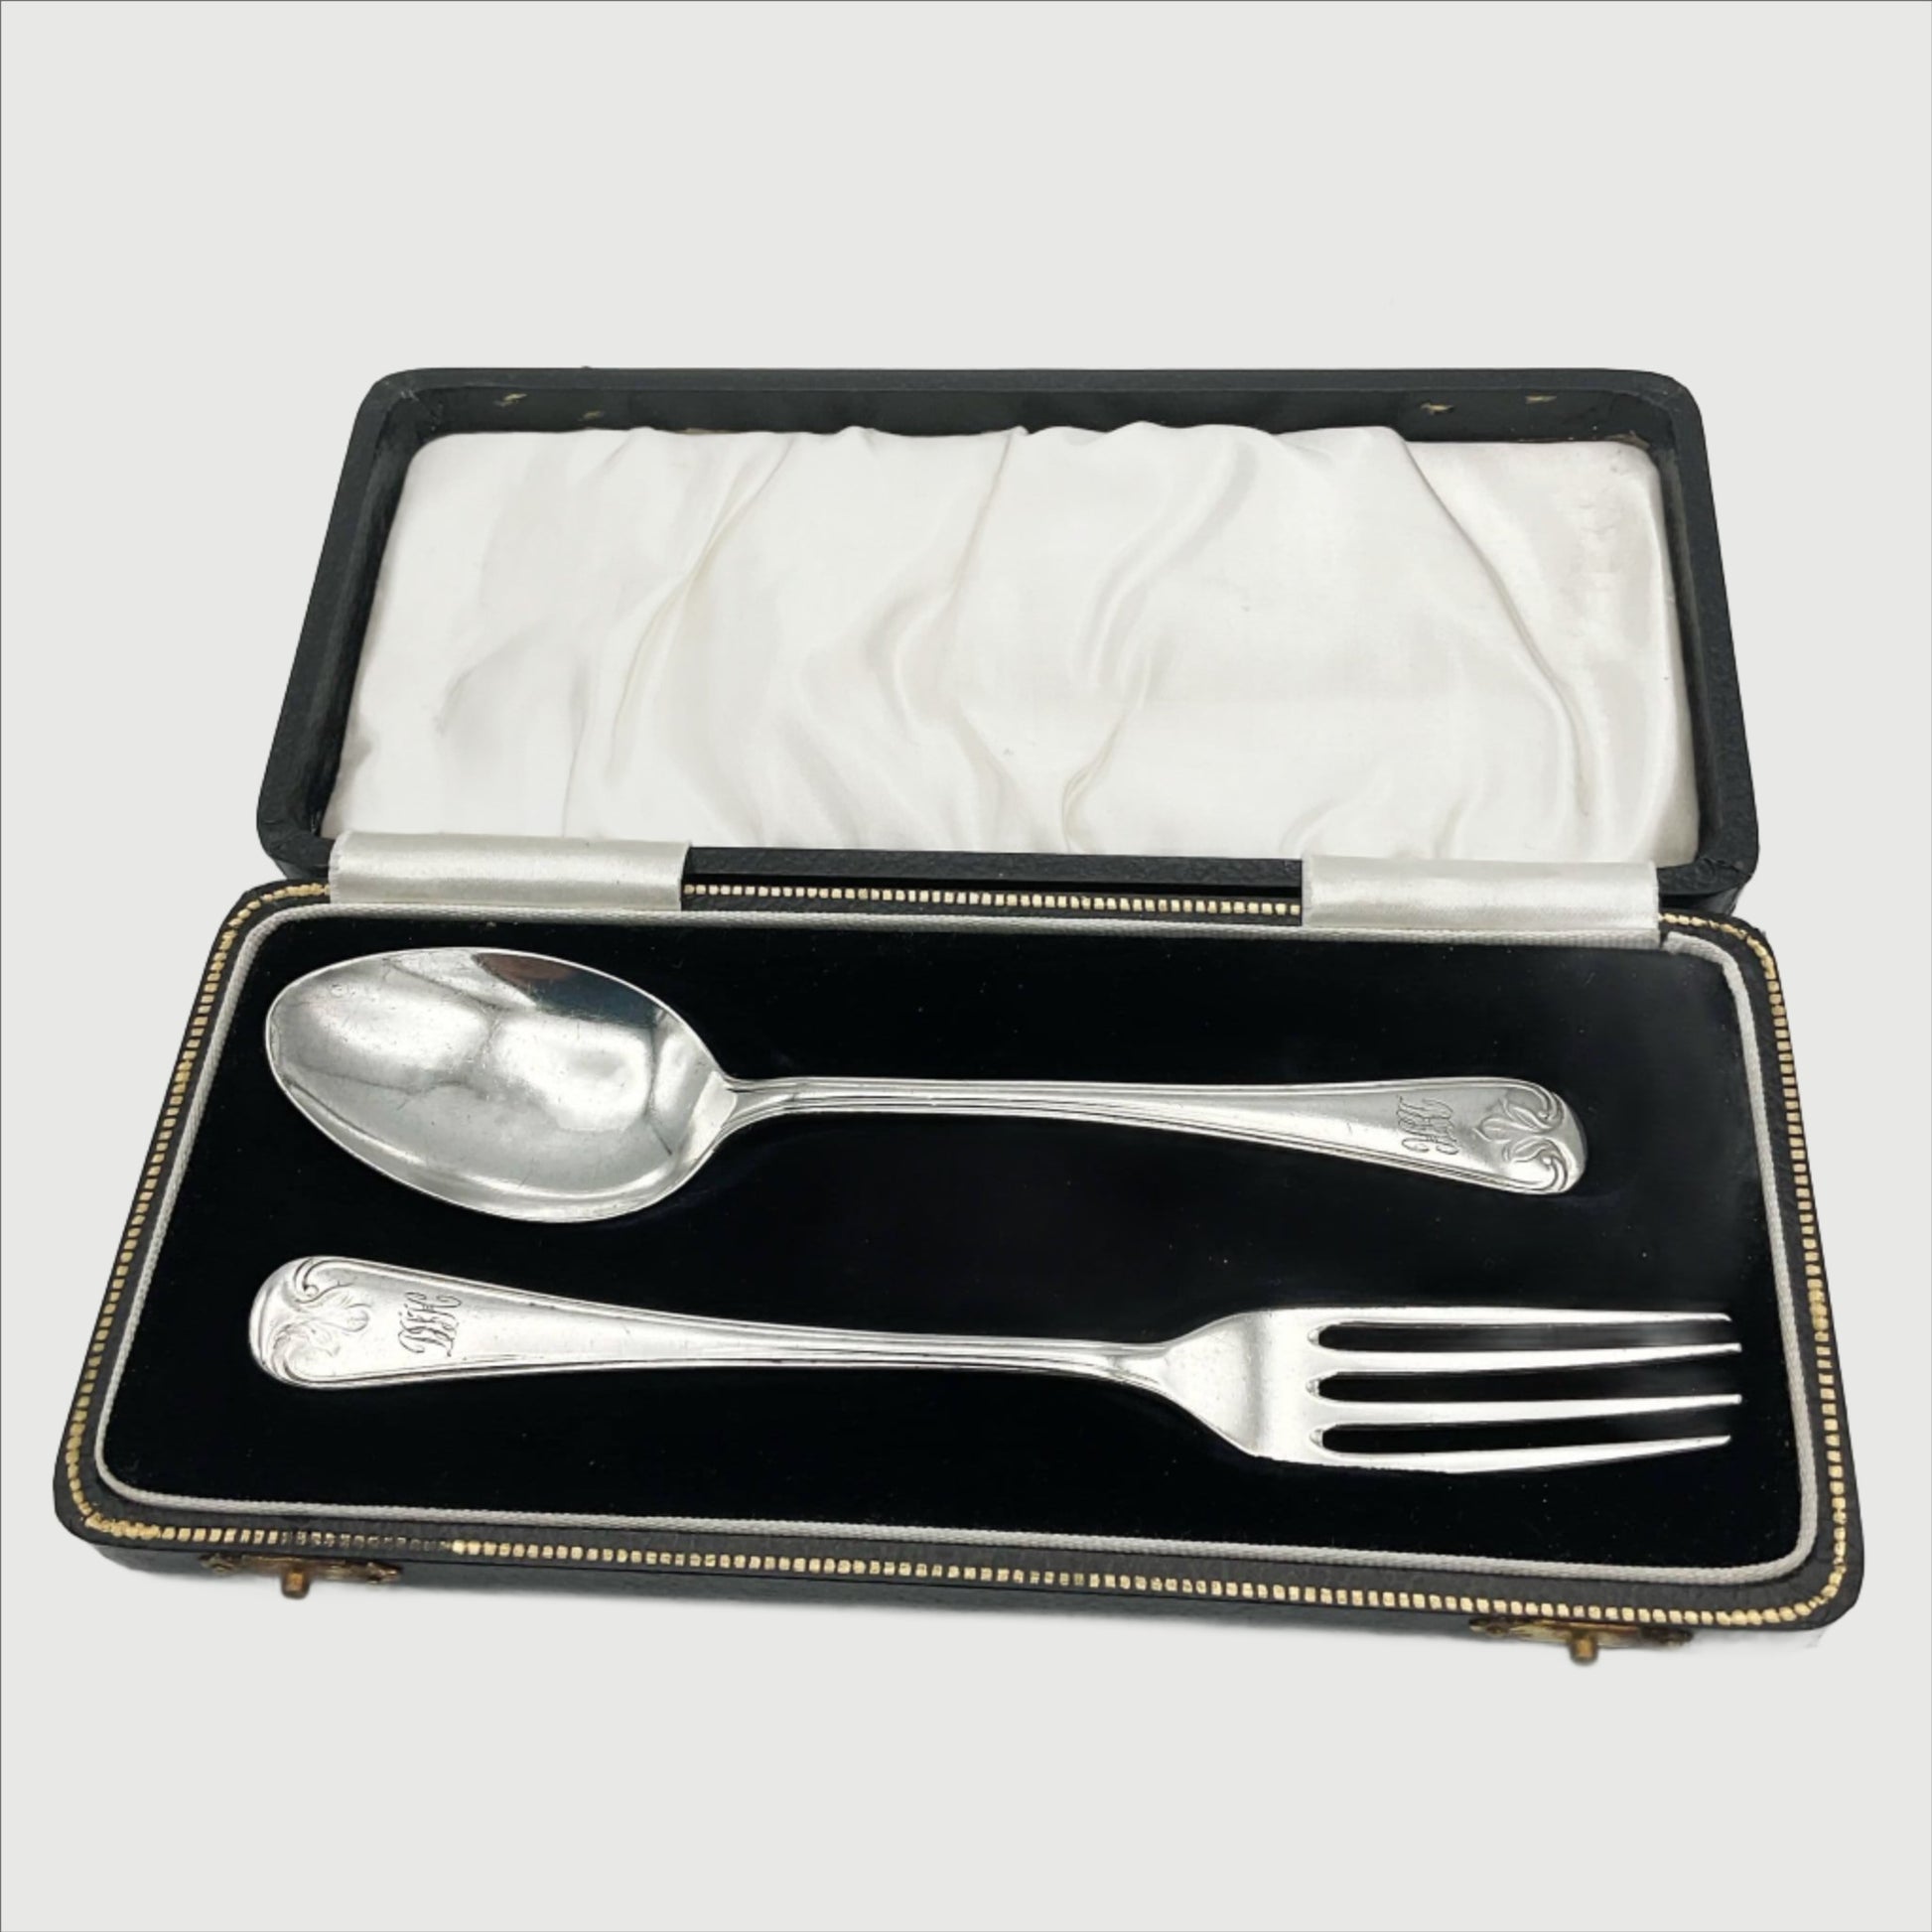 A matching silver spoon and fork sitting in a black presentation box.